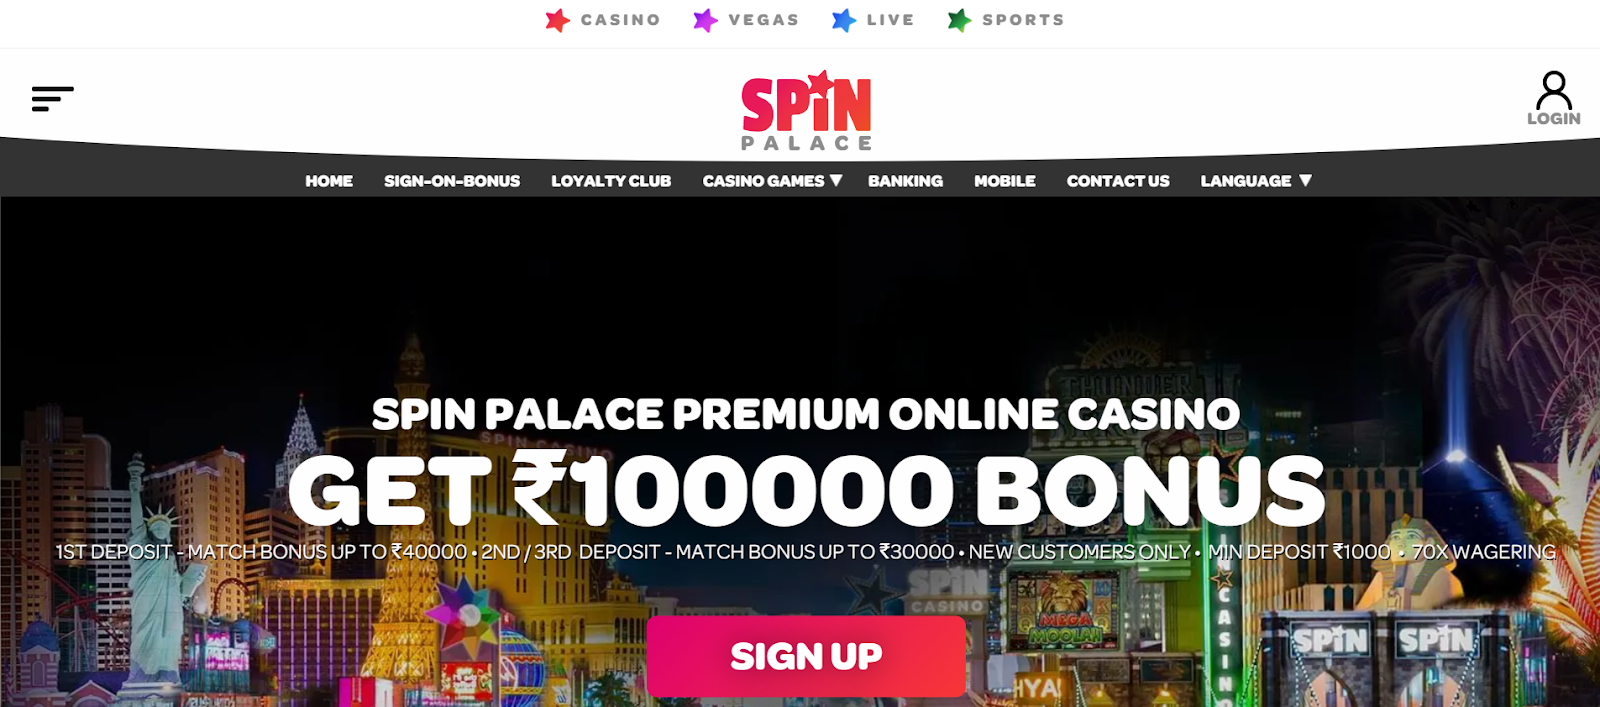 Spin Palace online casino 1